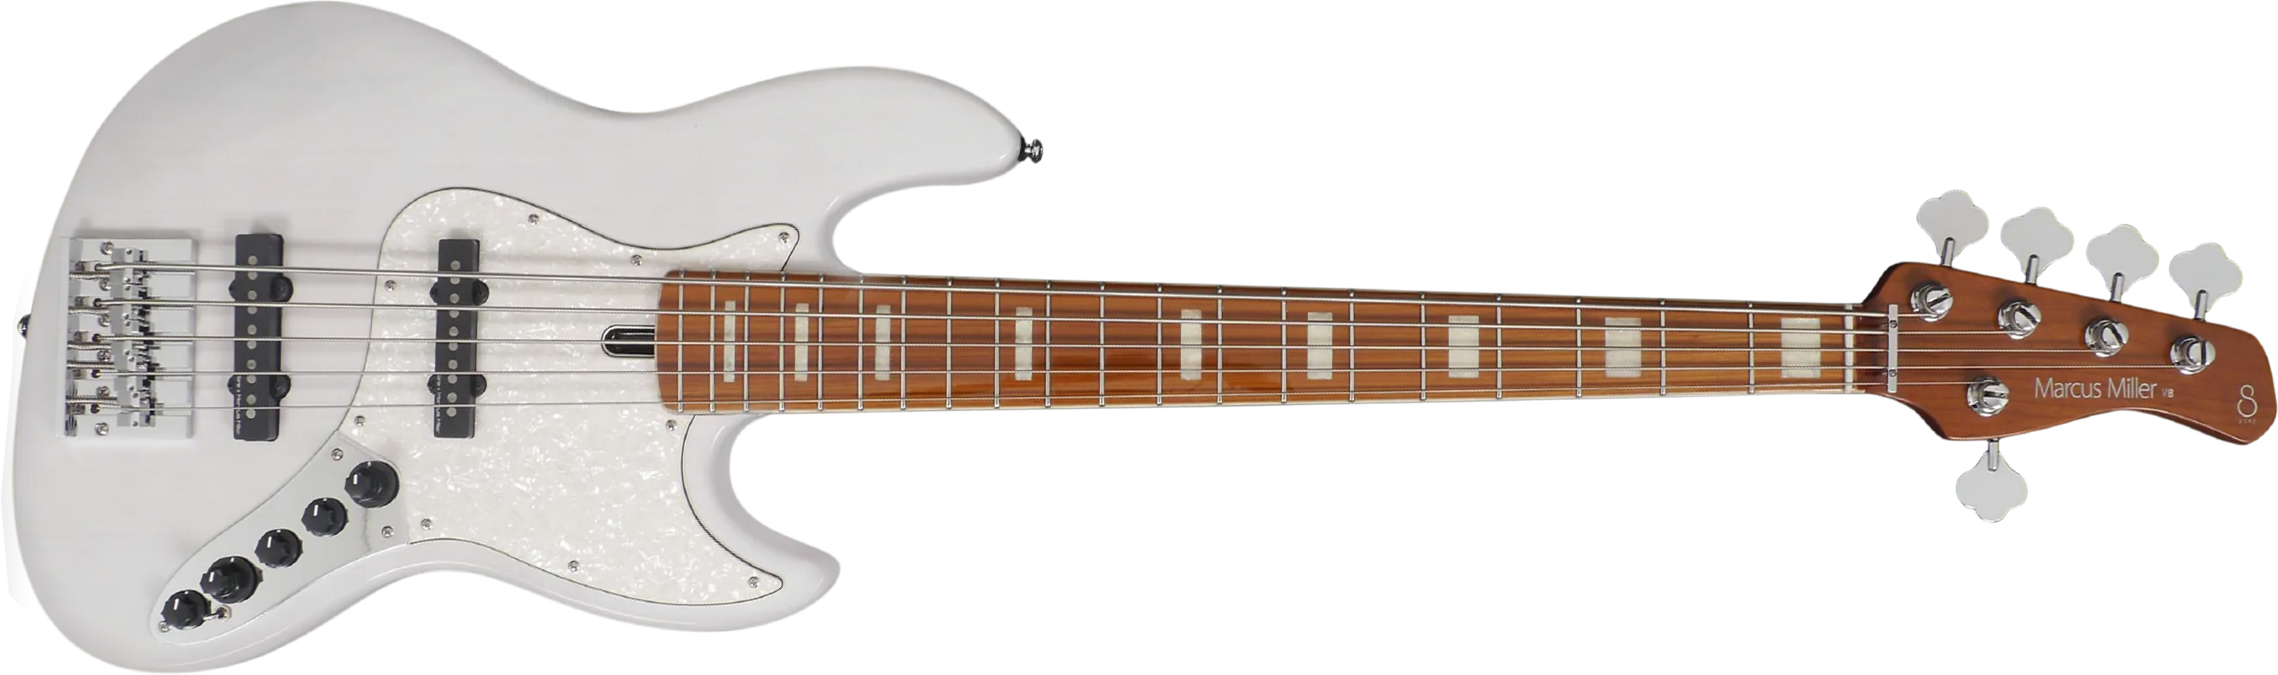 Marcus Miller V8 5st 5c Active Mn - White Blonde - Solidbody E-bass - Main picture